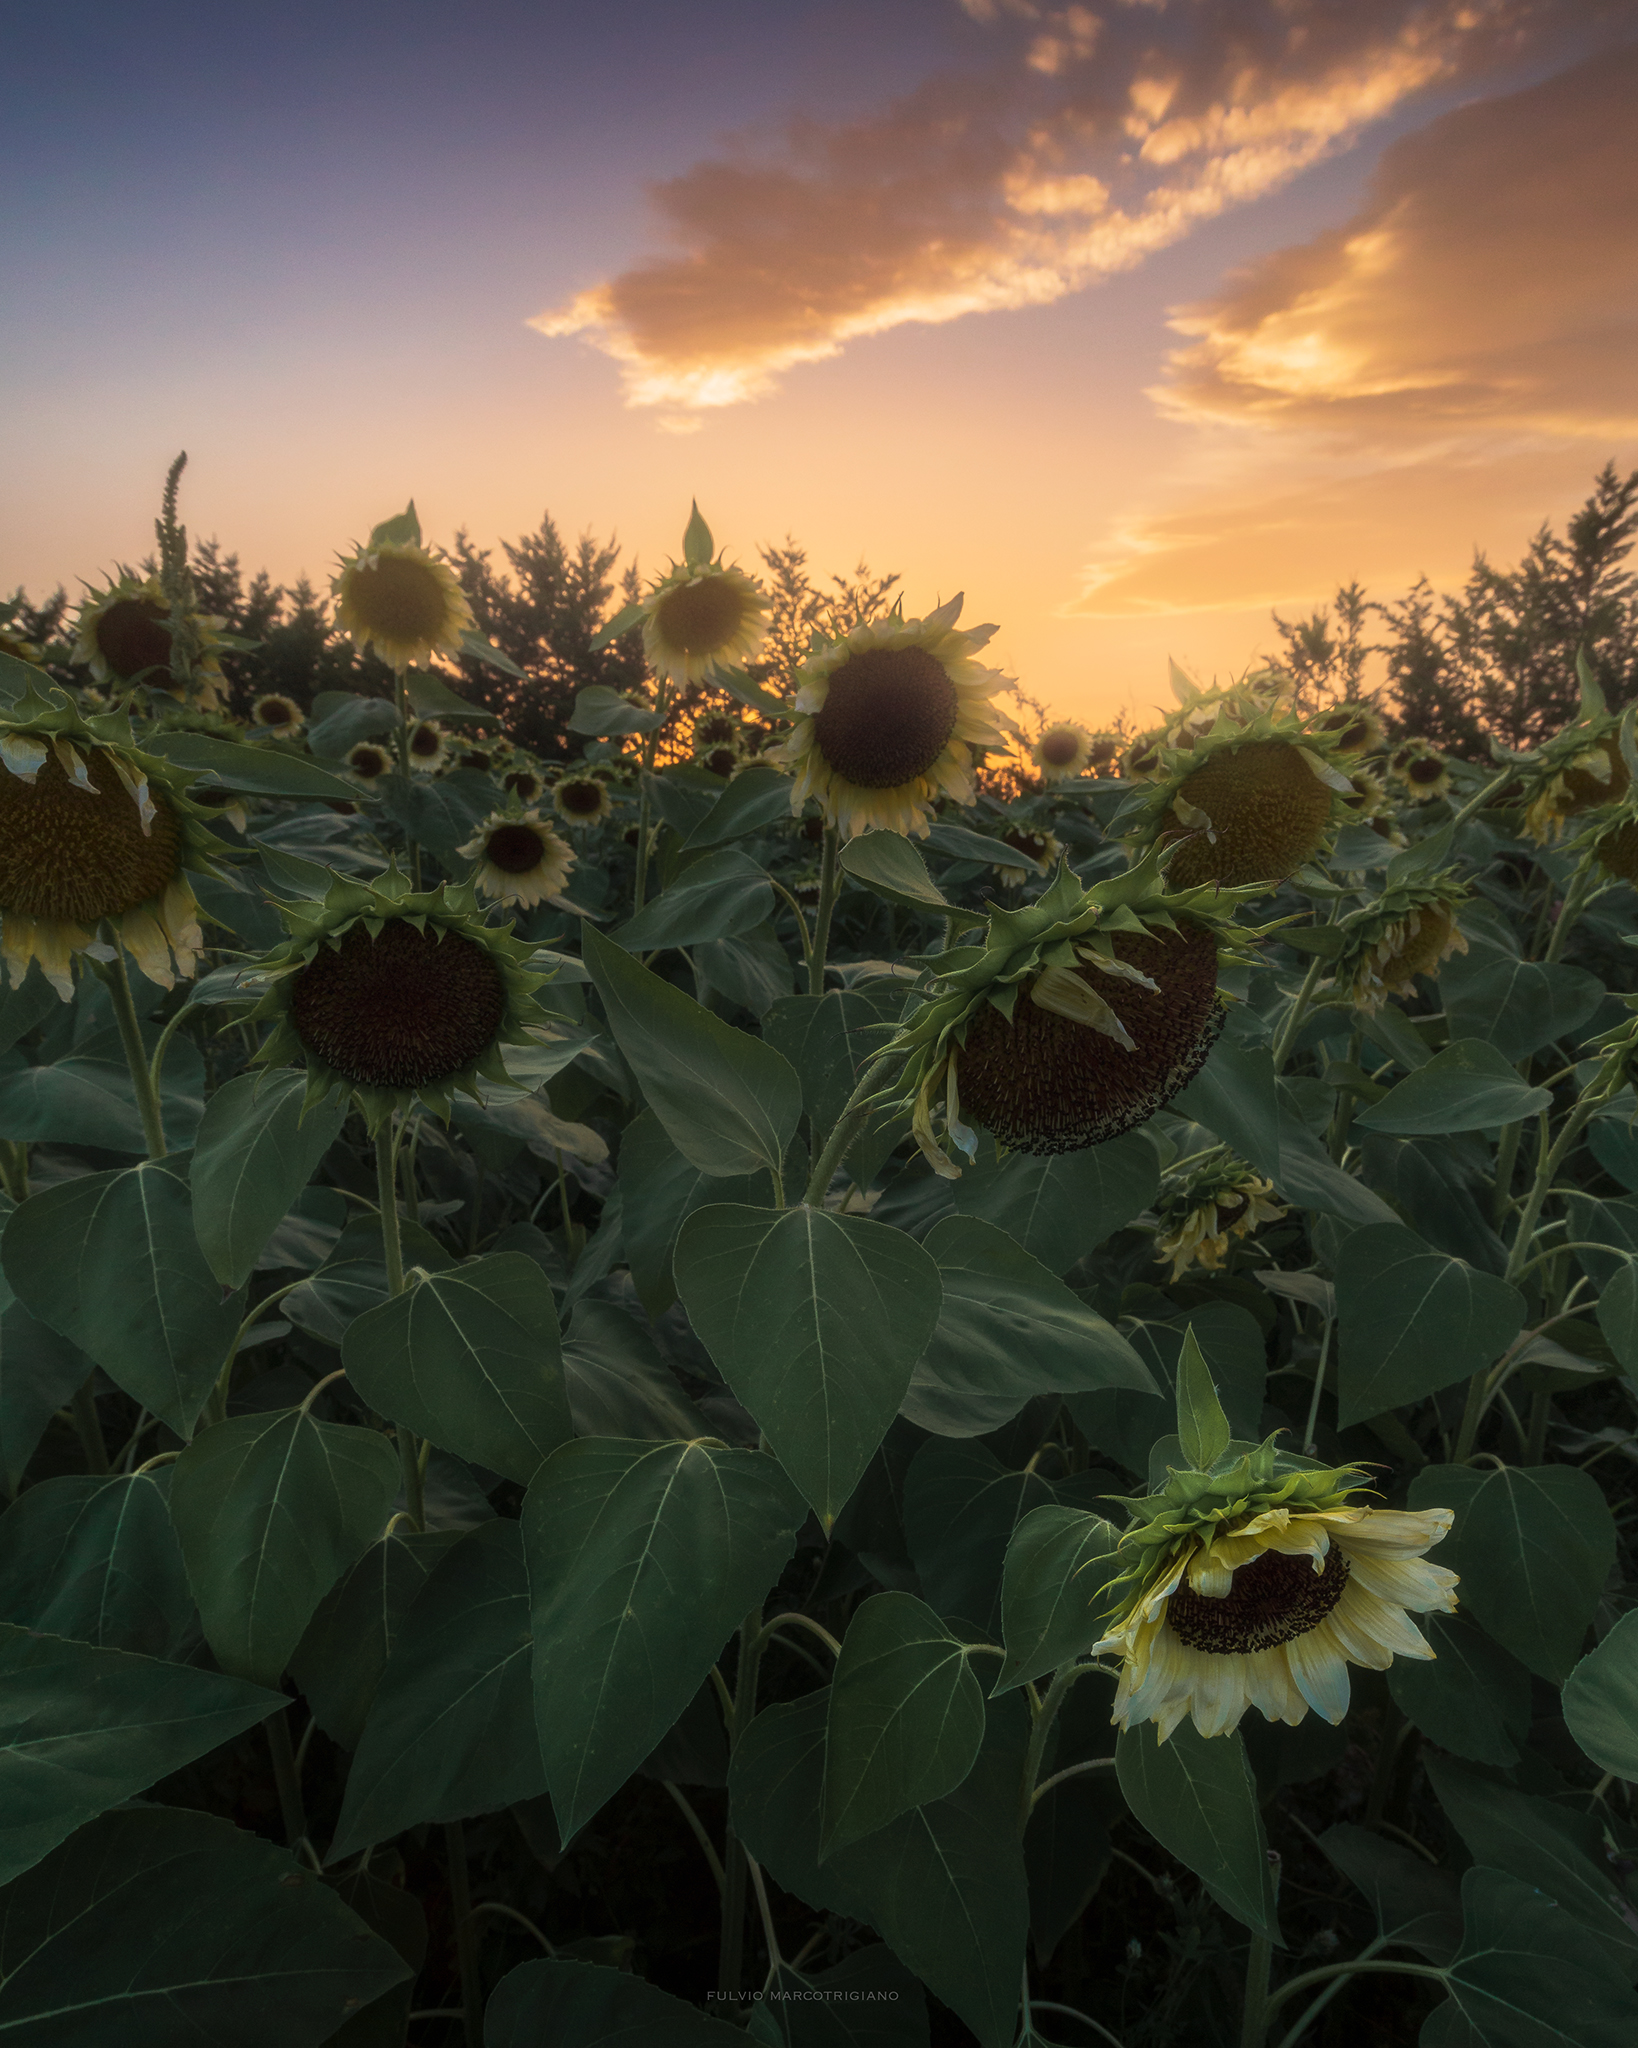 Sunset in the sunflowers field...